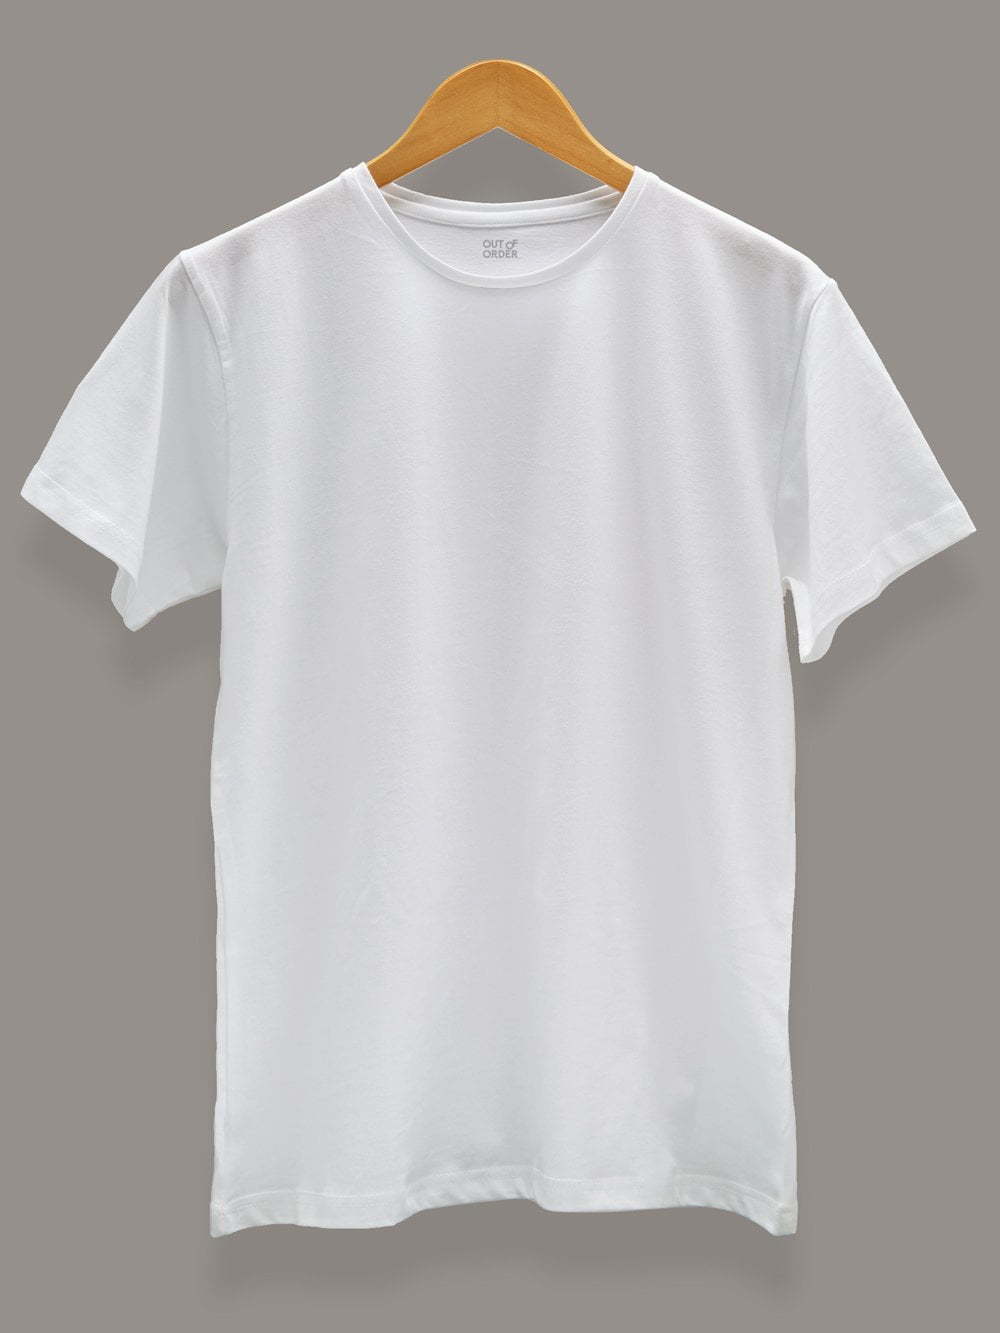 1.Premium Plain T-shirt Combo 3 by OUT OF ORDER